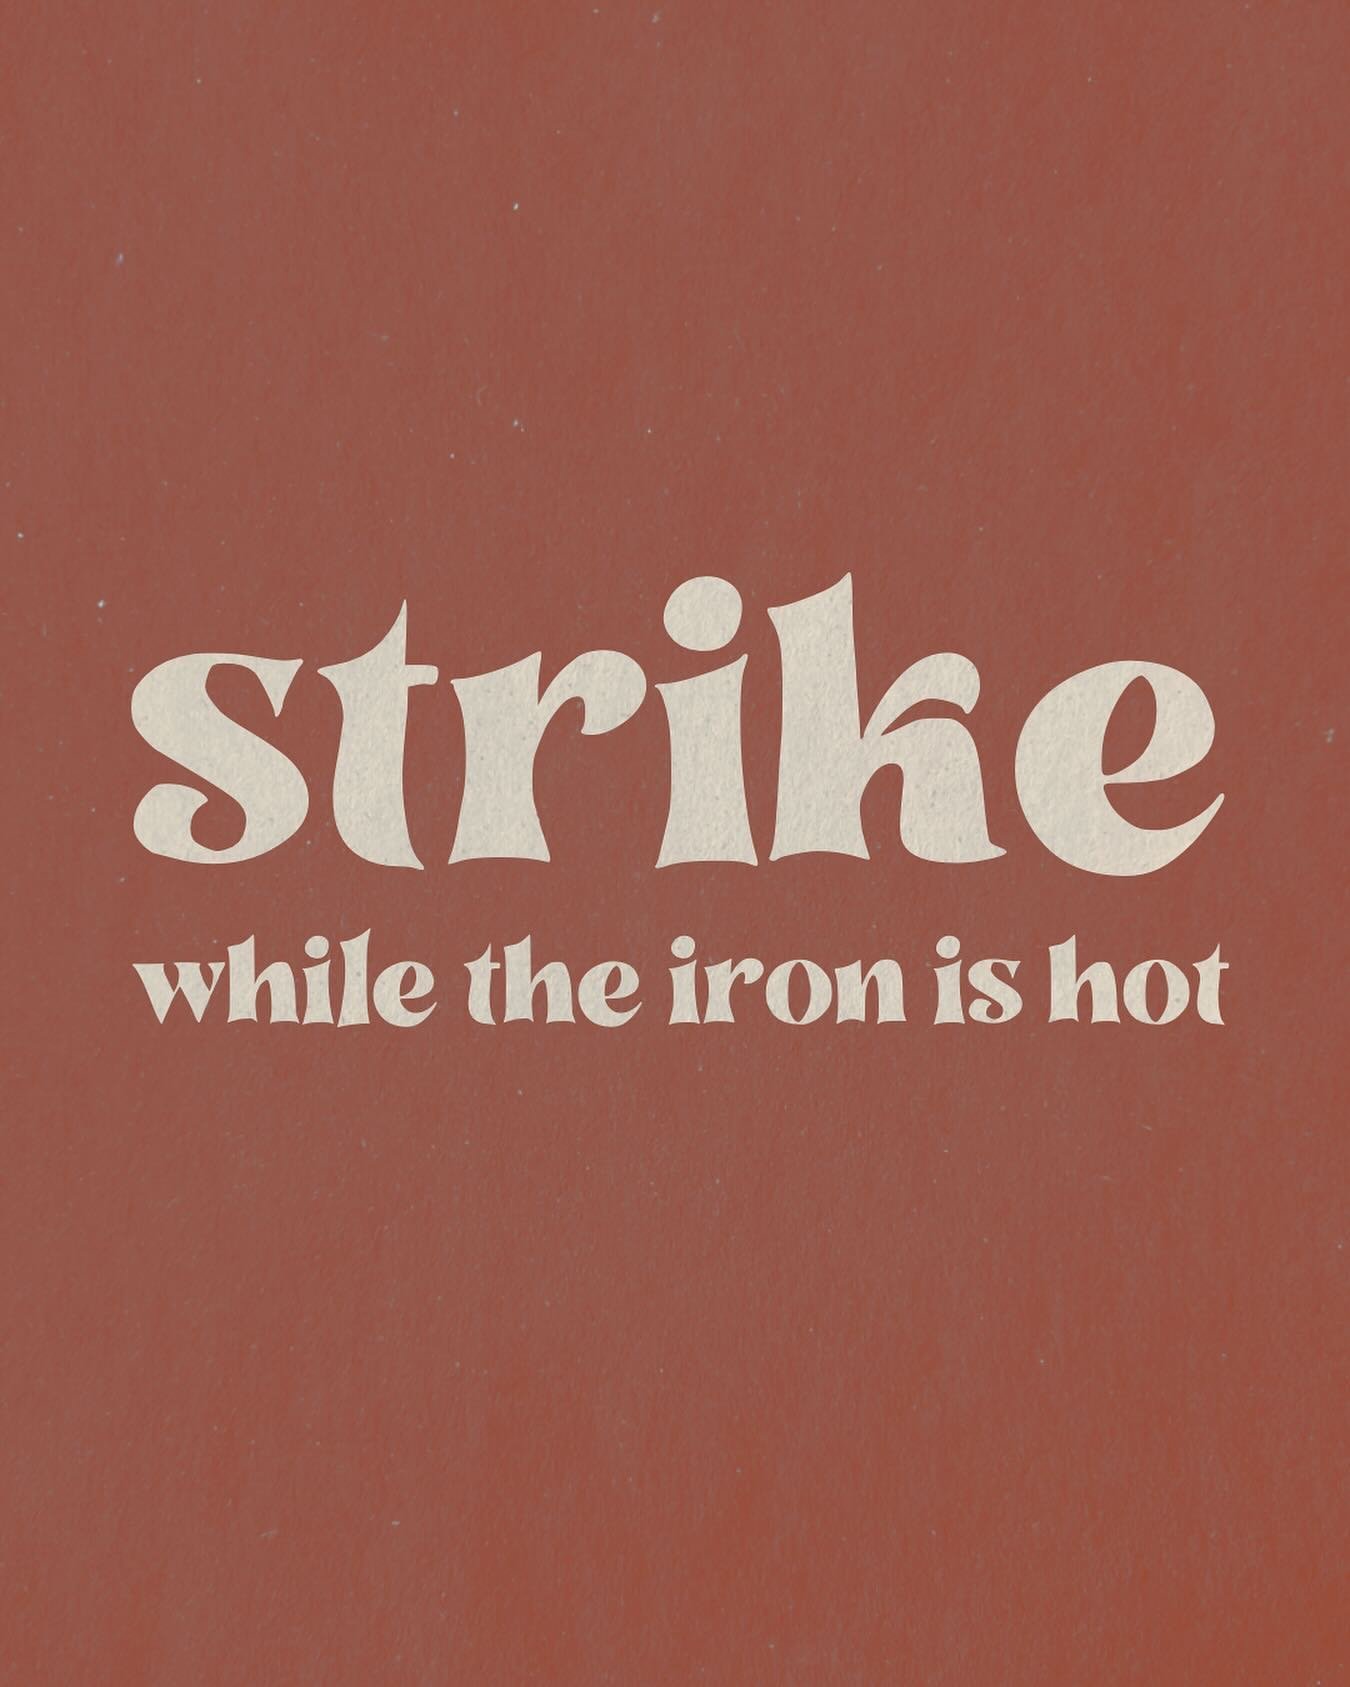 Strike While the Iron is Hot | Solo

There&rsquo;s no better feeling when everything we&rsquo;re doing seems to be clicking. I&rsquo;m currently in a very productive phase. My creative output is higher than usual, and it&rsquo;s a really empowering f